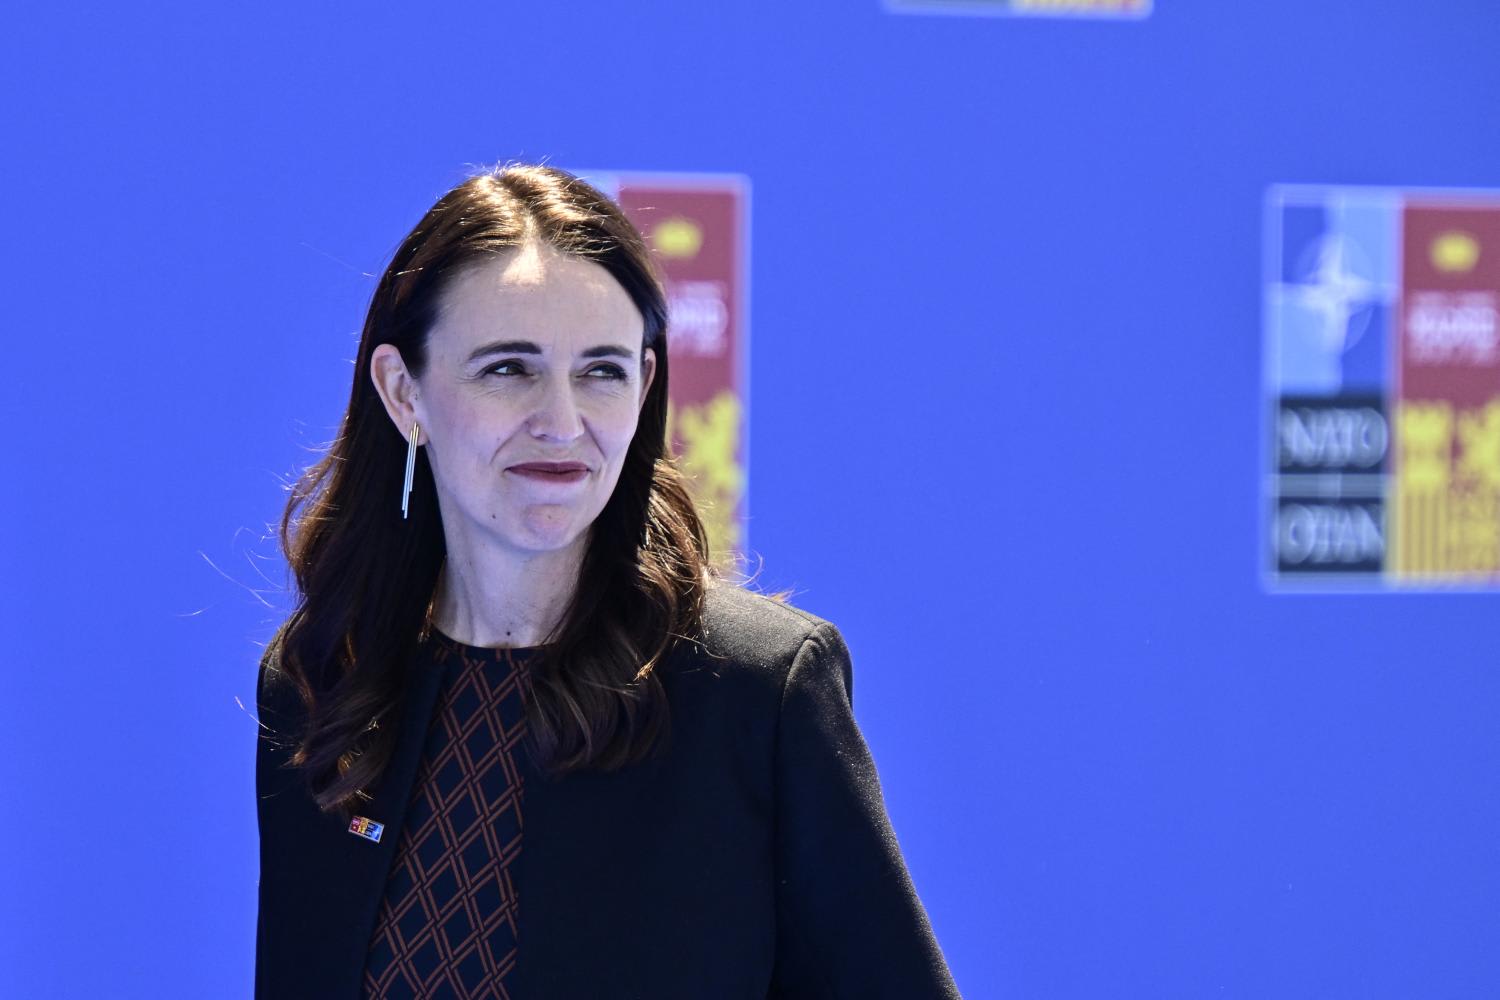 New Zealand Prime Minister Jacinda Ardern arrives for the Nato summit at the Ifema congress centre in Madrid, on June 29, 2022.